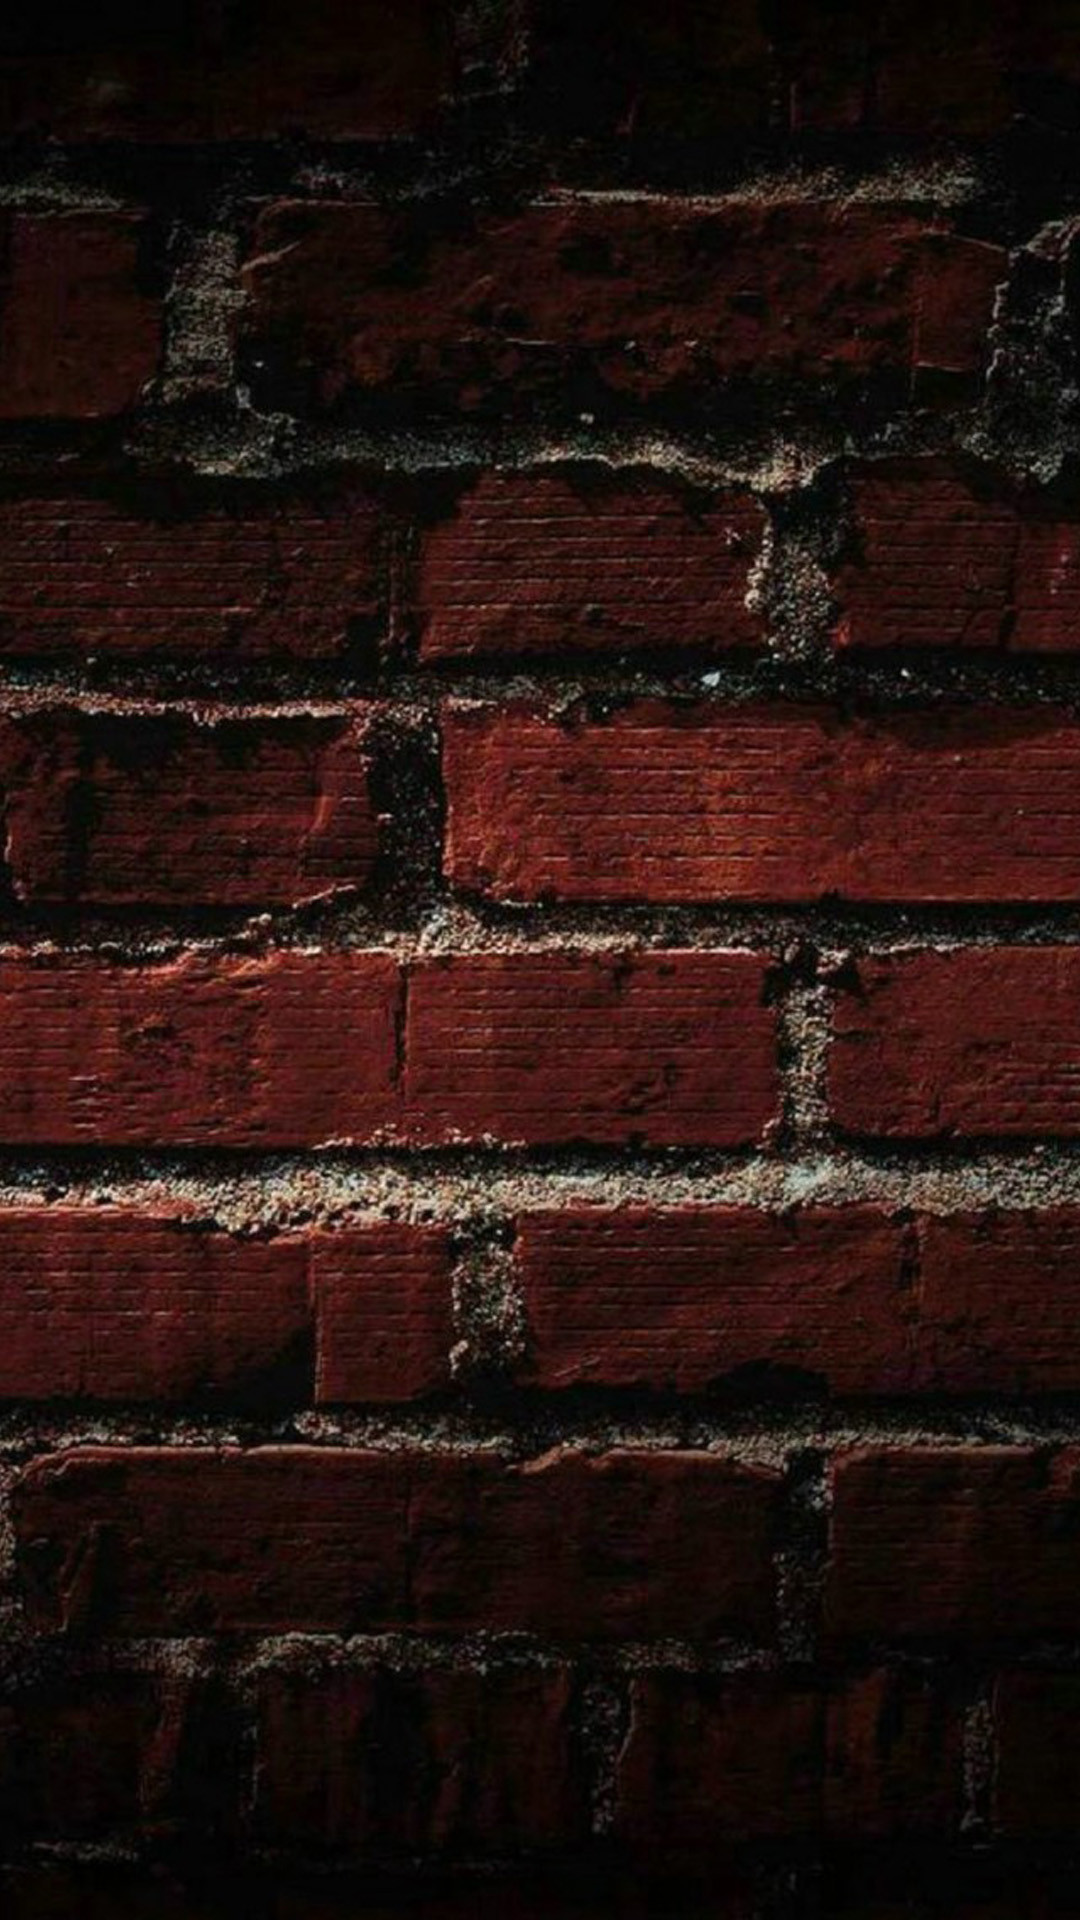 1080x1920 Old wall texture iphone 6 plus wallpaper, iPhone 6 Plus Wallpaper